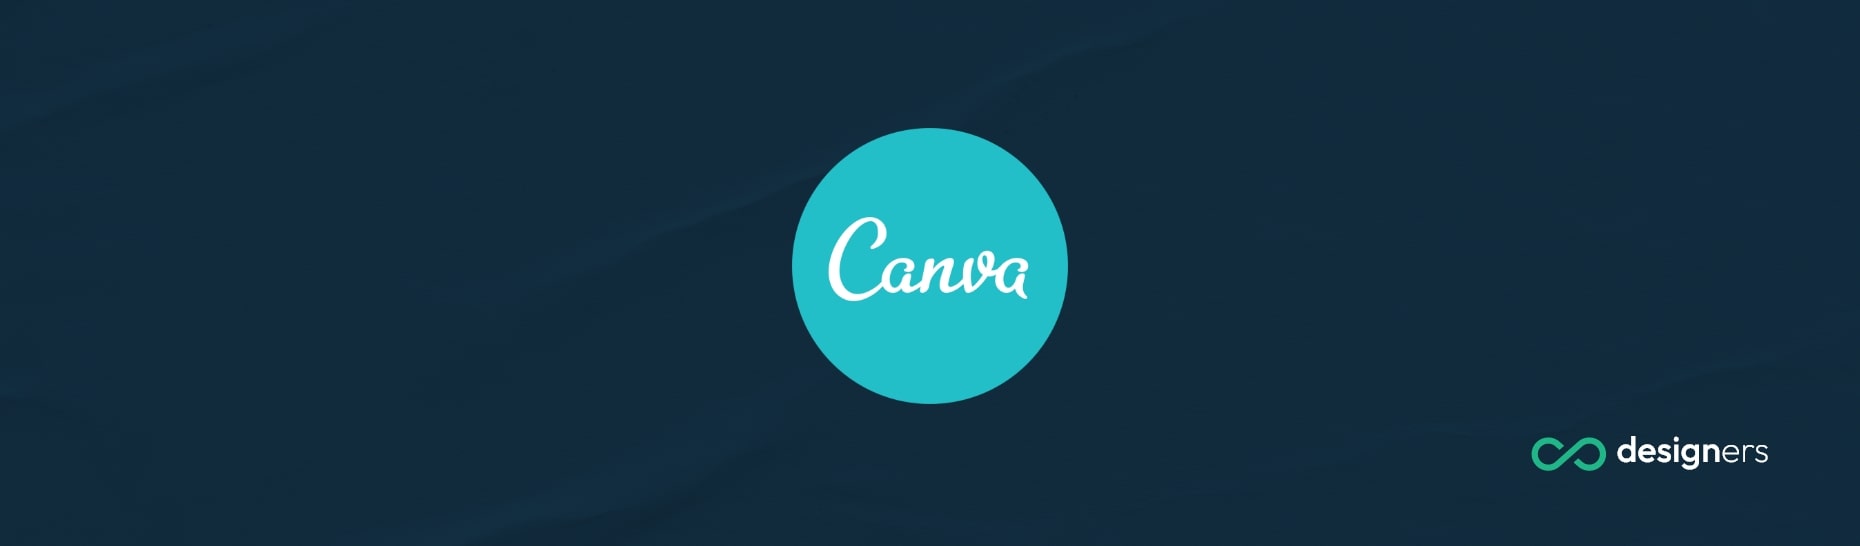 What Is the Harry Potter Font Called on Canva?